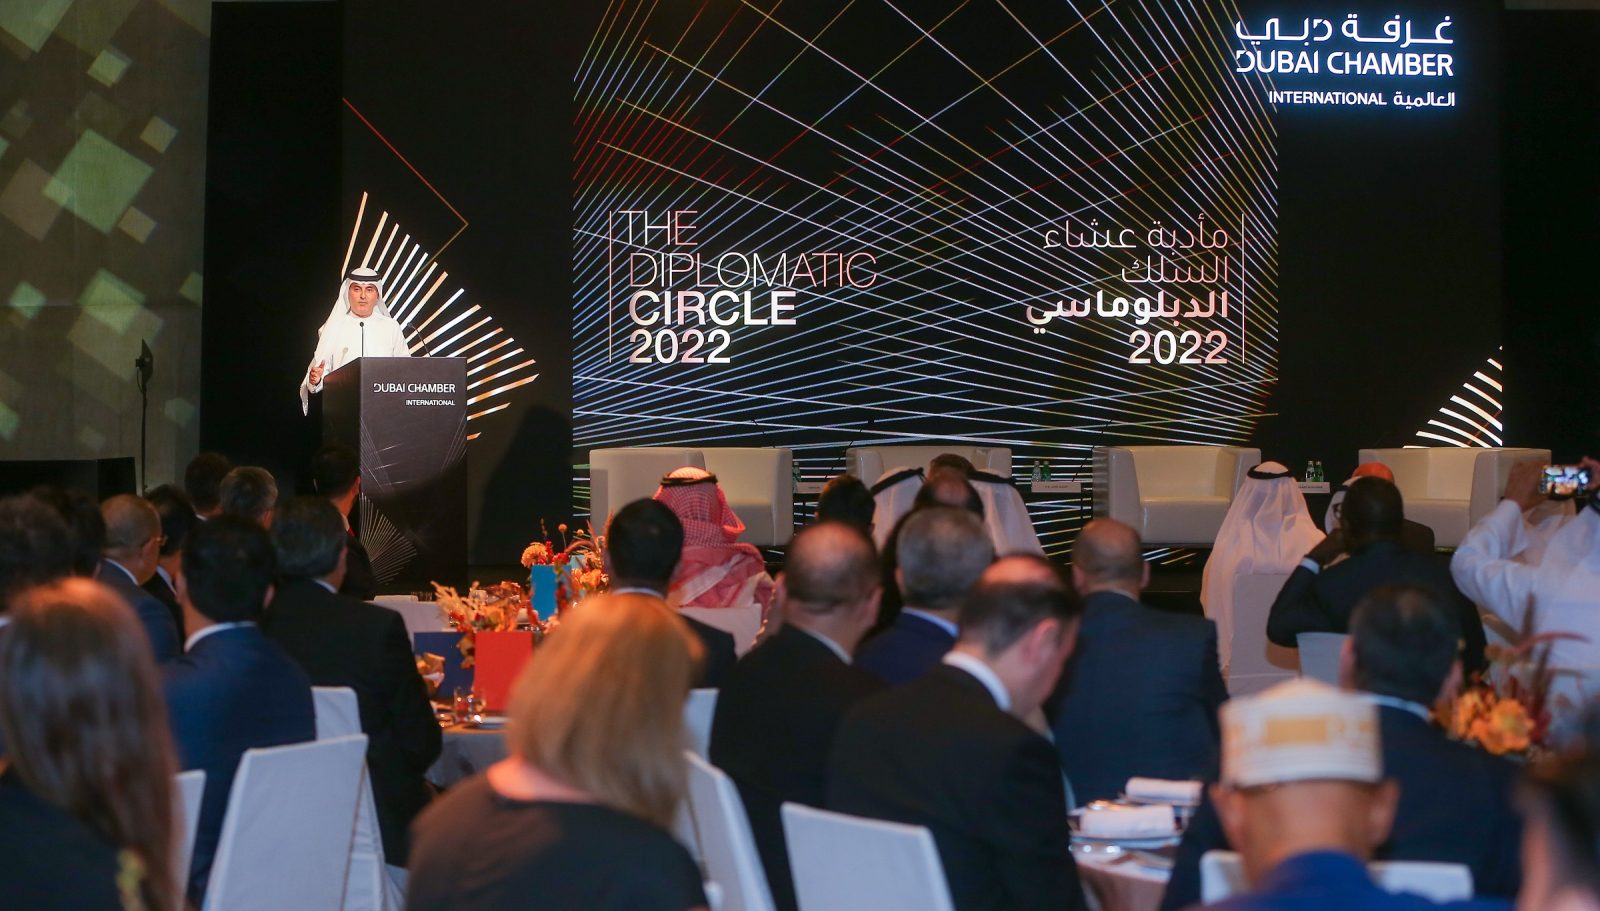 Dubai Chambers unveils plans to expand role of business councils